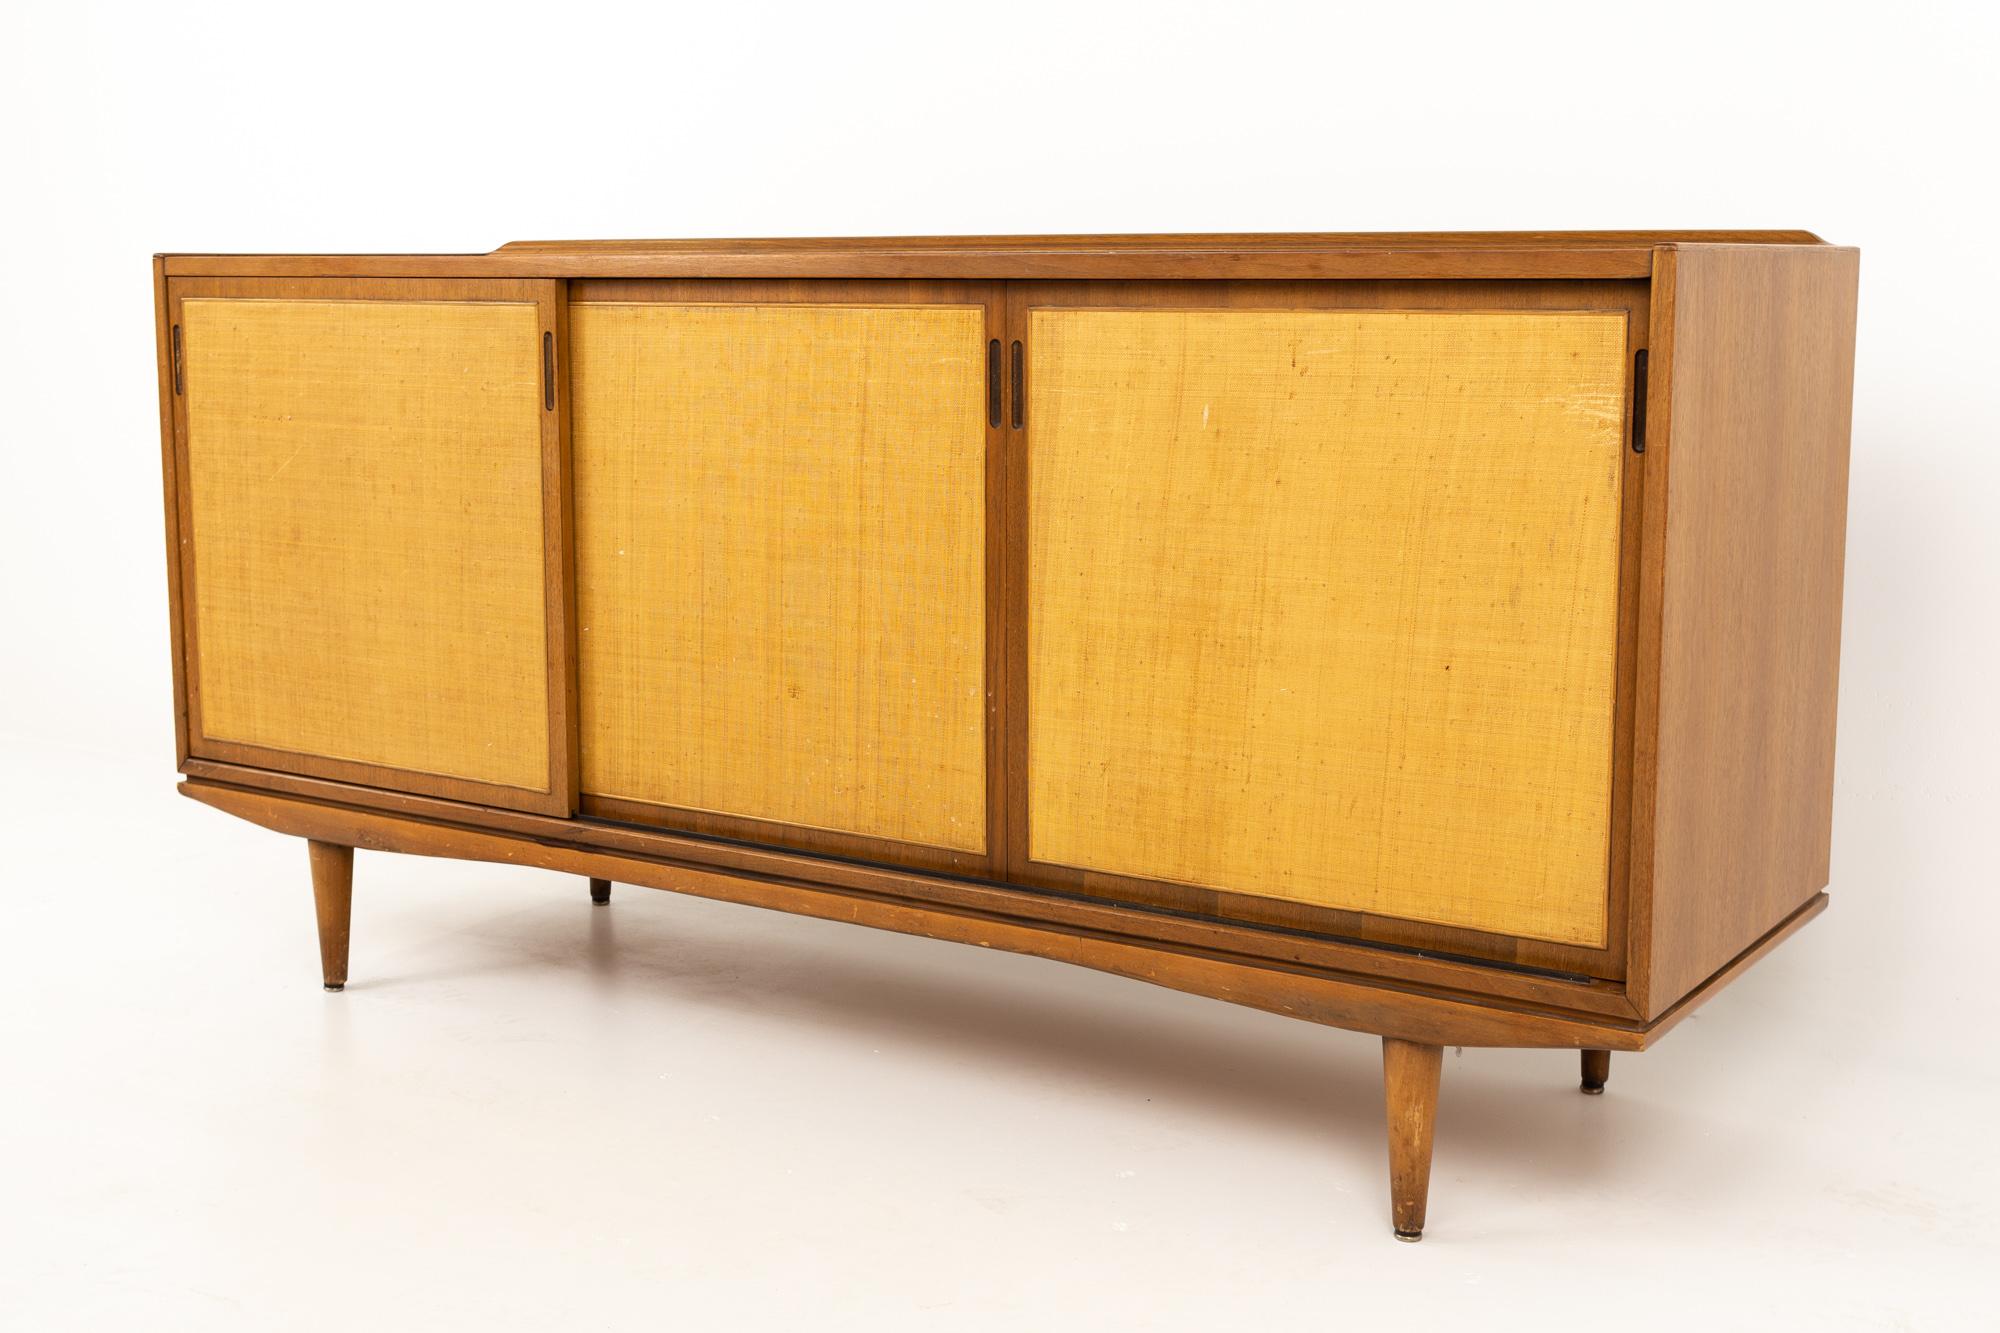 Morganton midcentury walnut and cane sideboard buffet credenza
Measures 66 wide x 20 deep x 32.25 inches high

All pieces of furniture can be had in what we call restored vintage condition. This means the piece is restored upon purchase so it’s